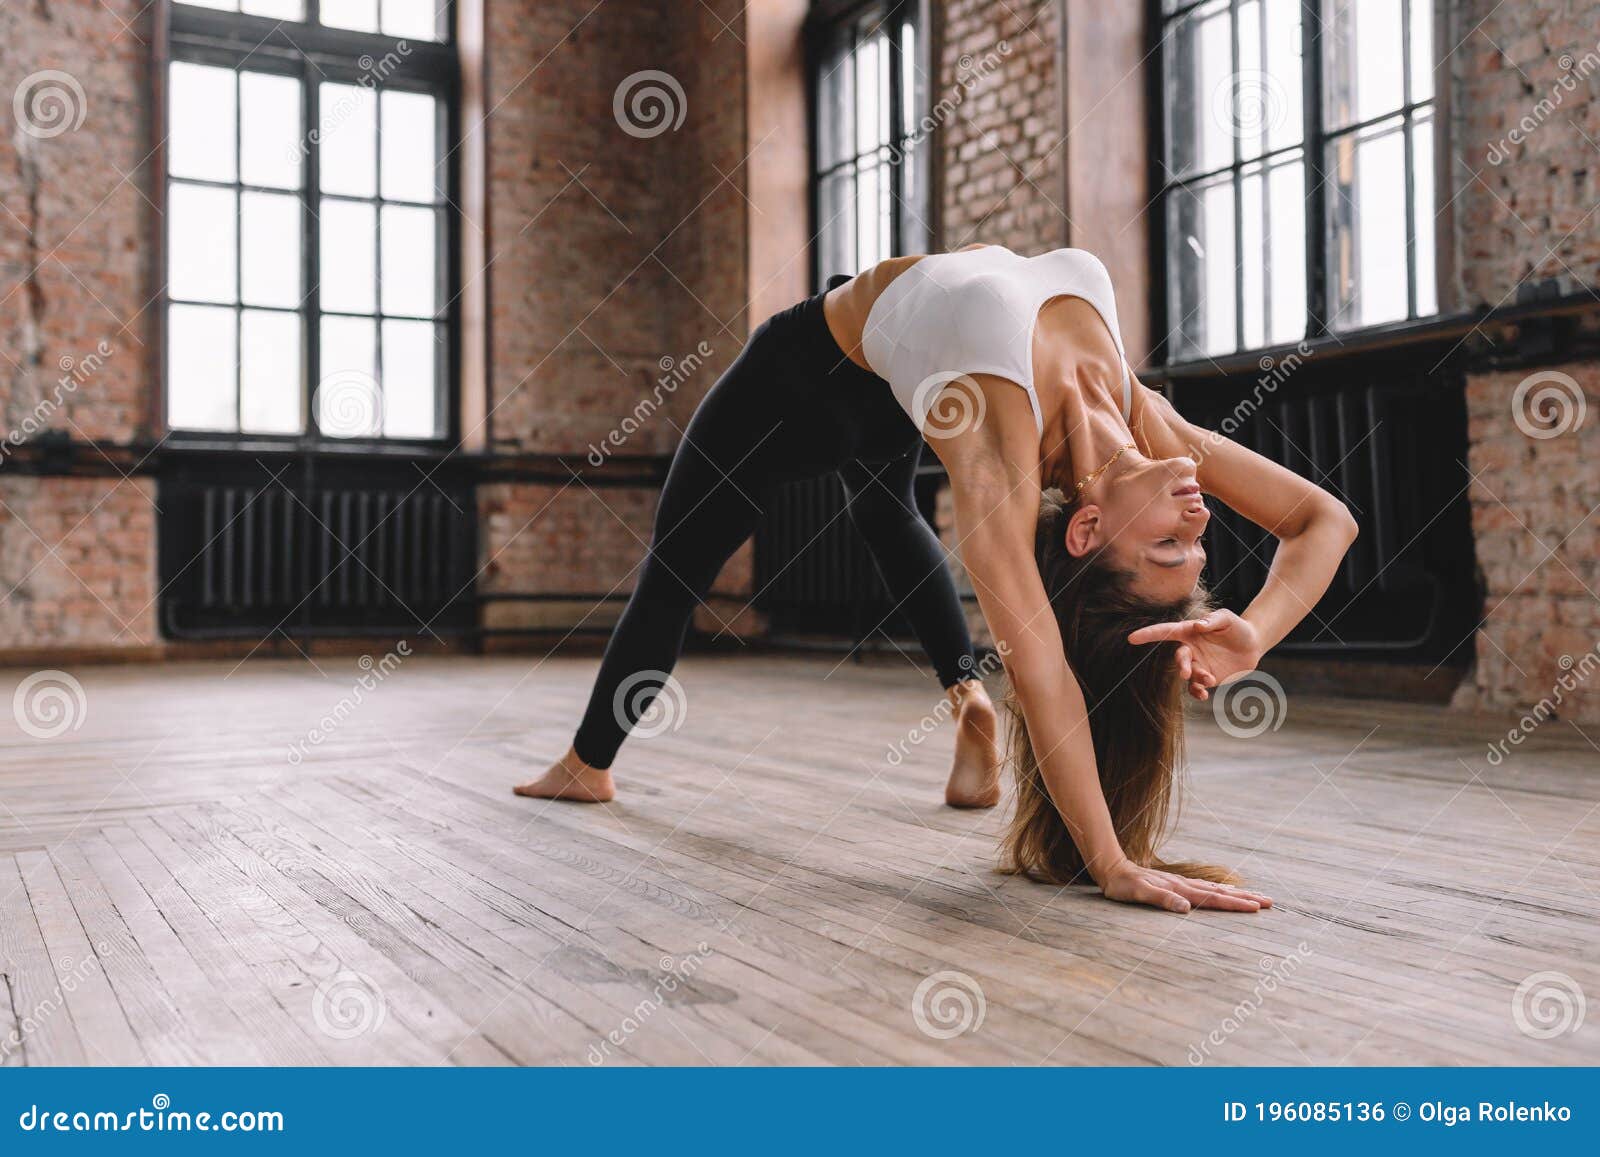 Young Attractive Woman Practicing Yoga At Home, Stretching In Camatkarasana  Exercise, Wild Thing, Flip-the-Dog Pose, Working Out, Wearing Sportswear,  Black Shorts, Top, Full Length, Studio Background Stock Photo, Picture and  Royalty Free